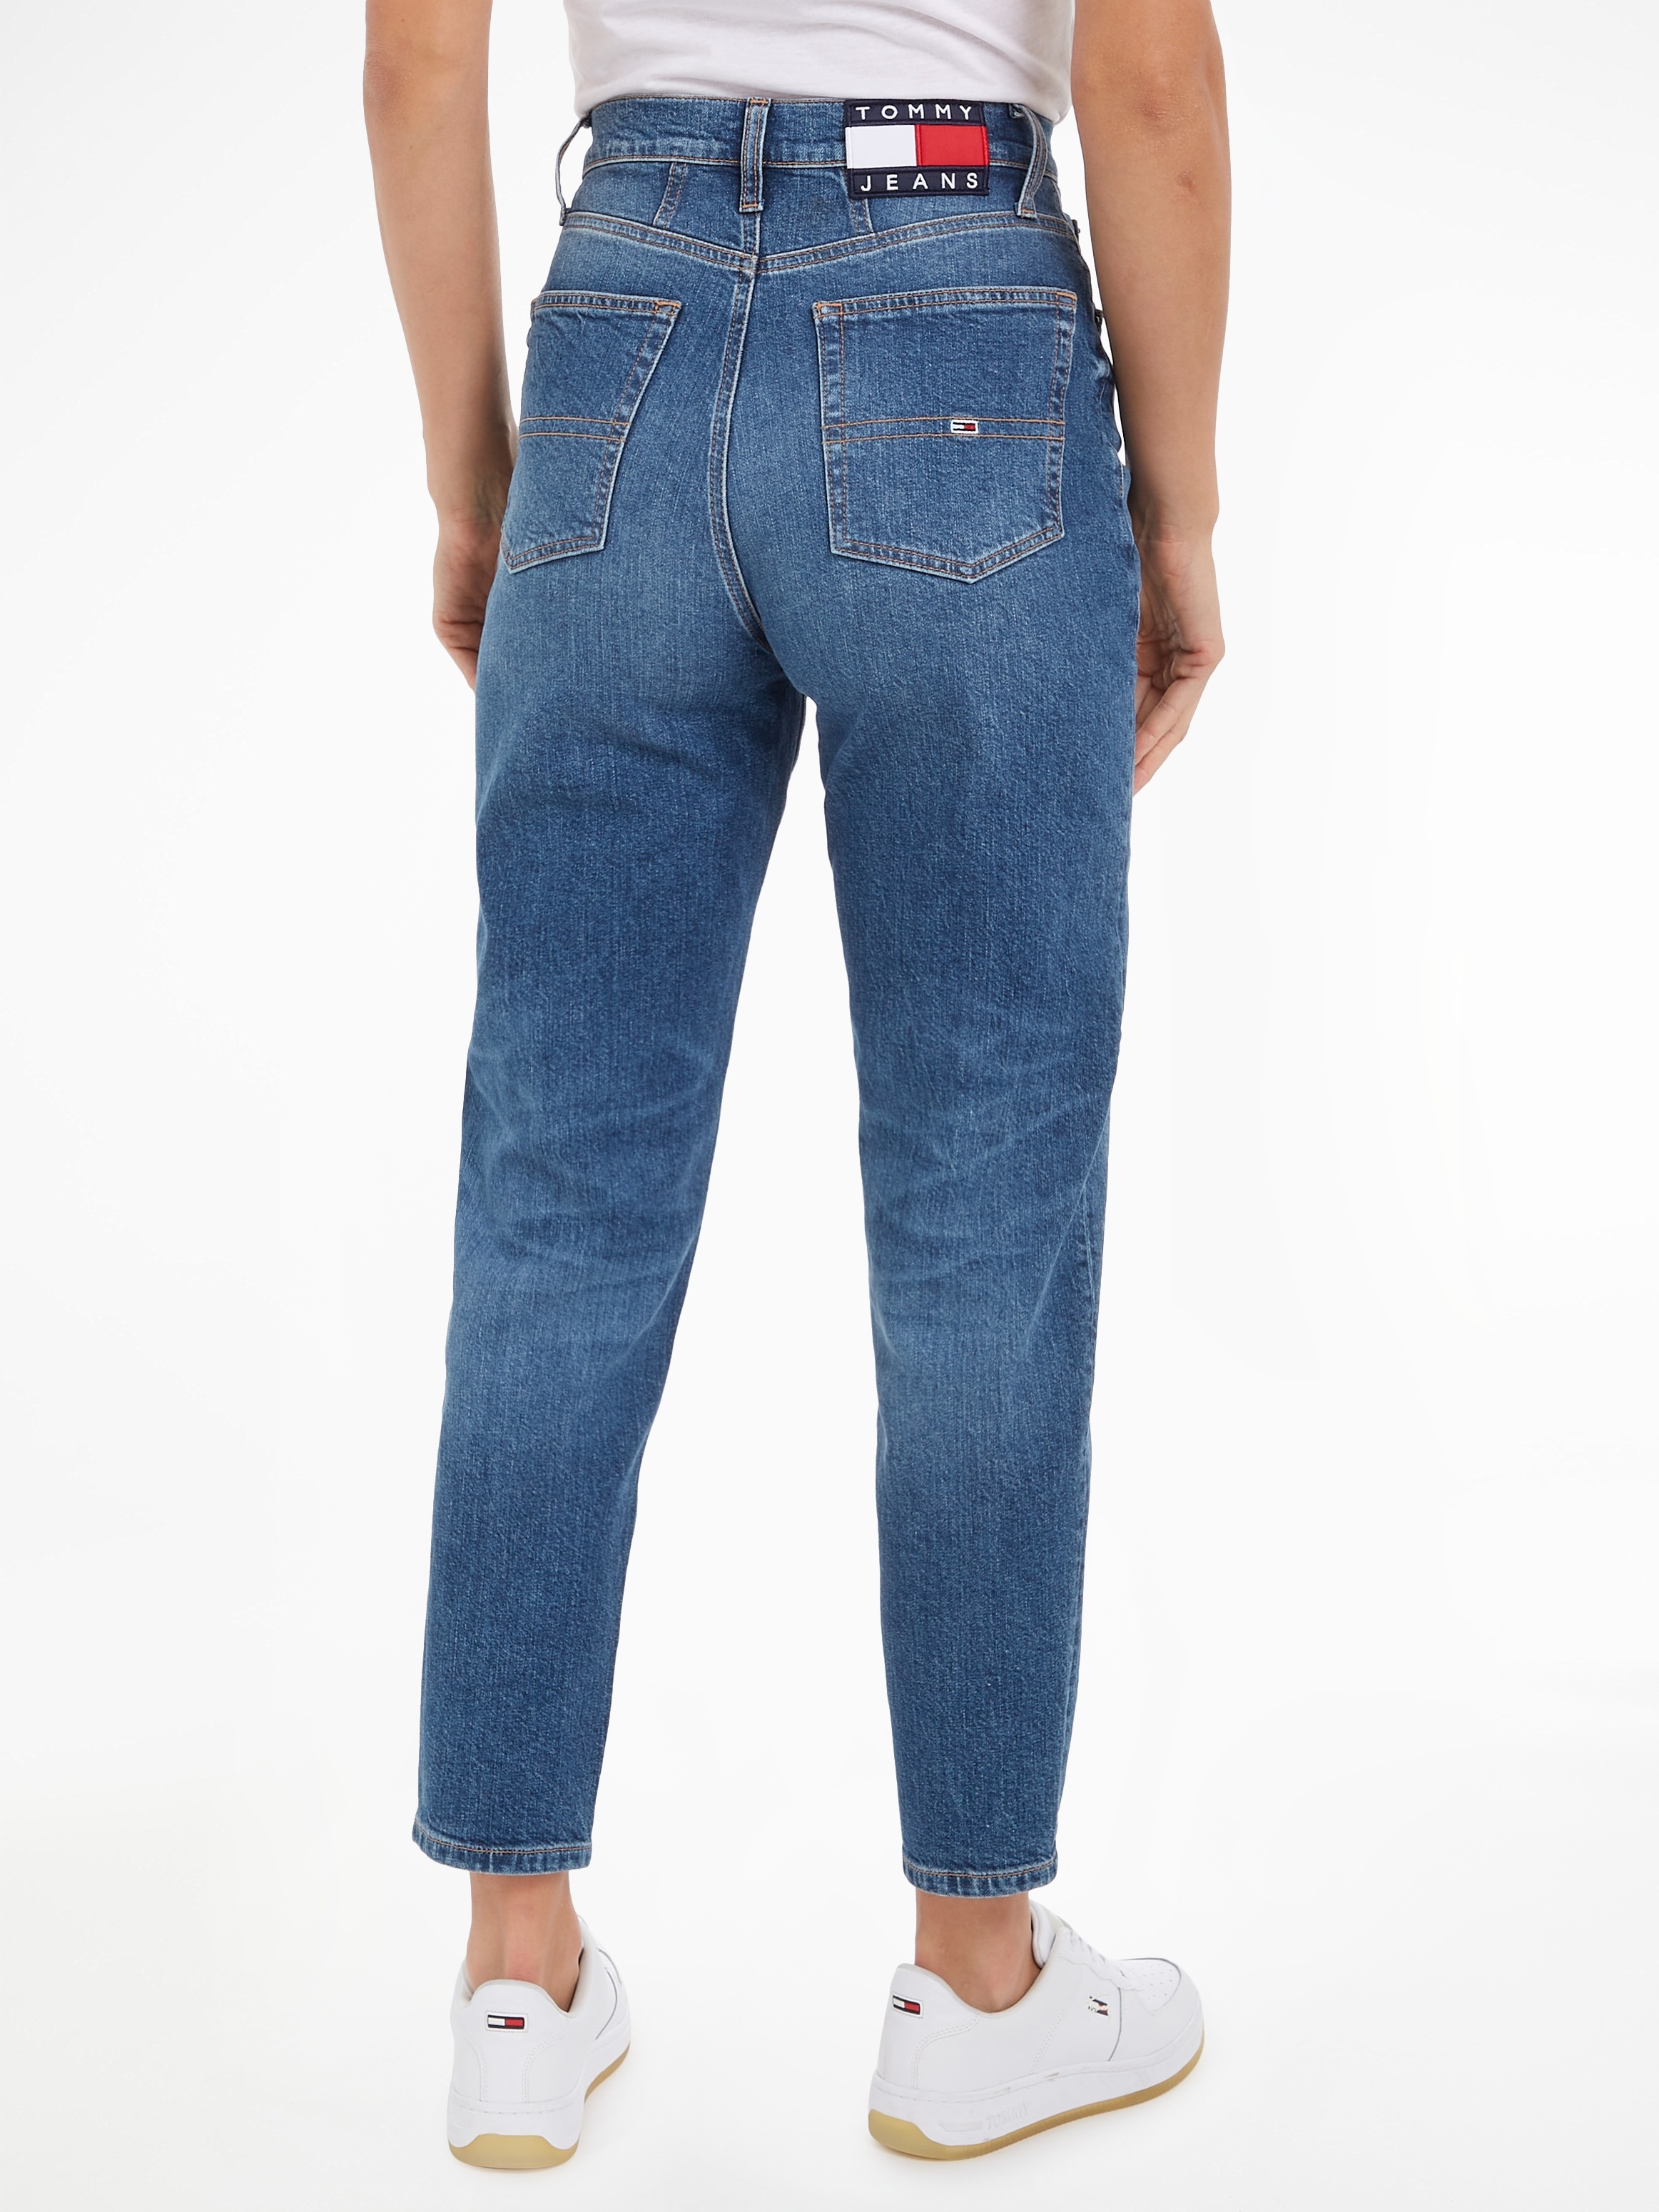 Tommy Jeans Mom-Jeans JEAN walking online und »MOM Labelflags Logobadge I\'m | CG5136«, TPR mit UHR